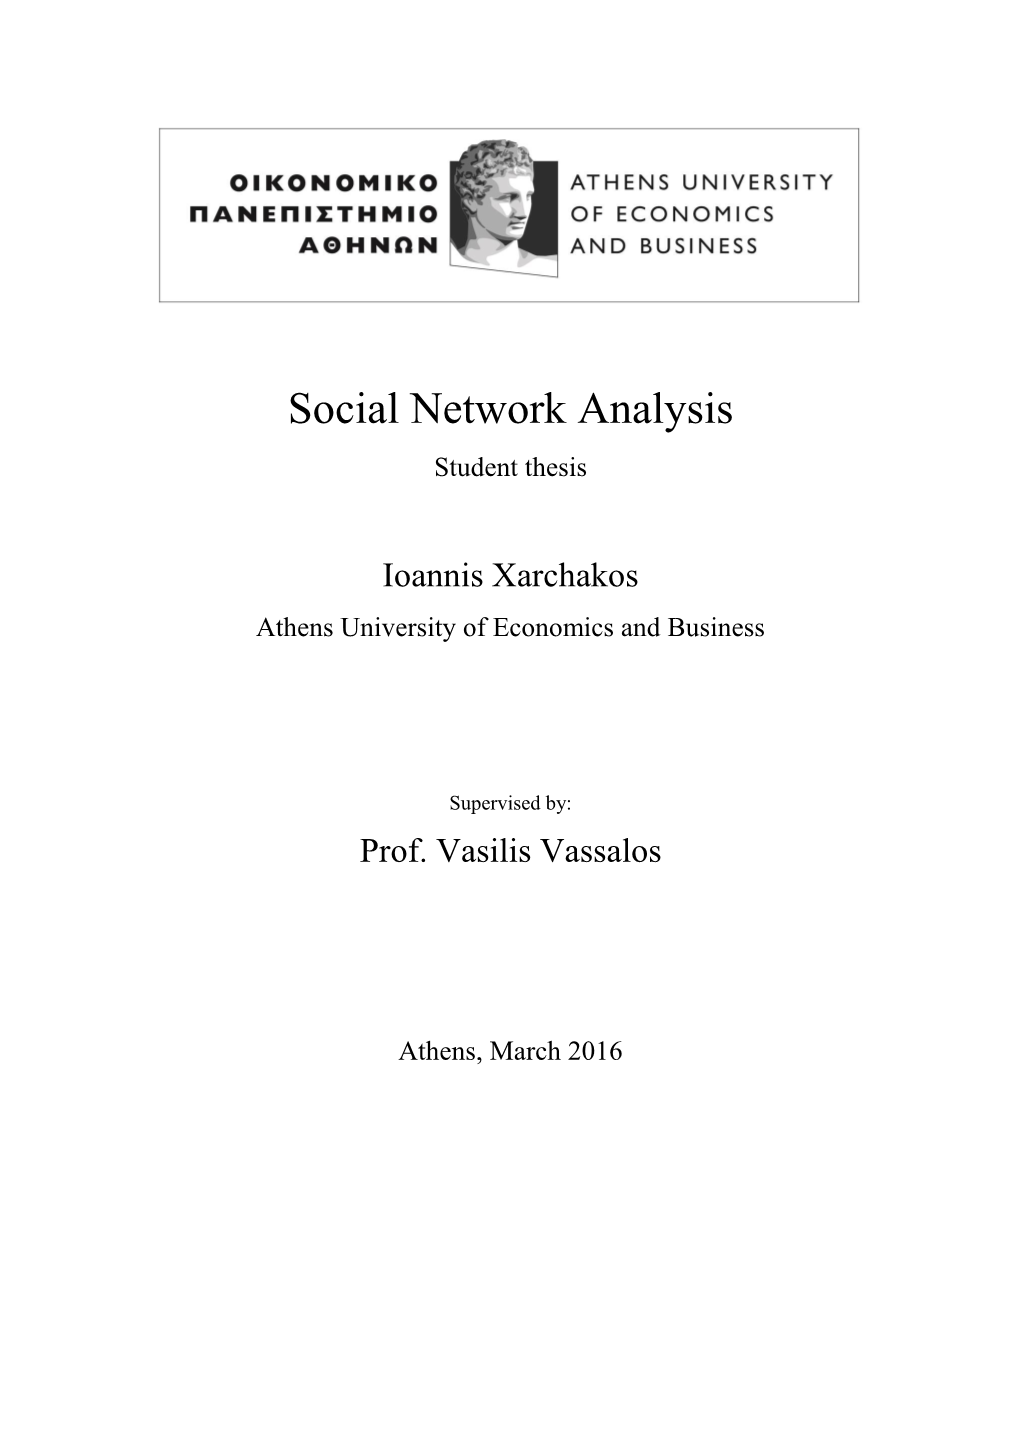 Social Network Analysis Student Thesis